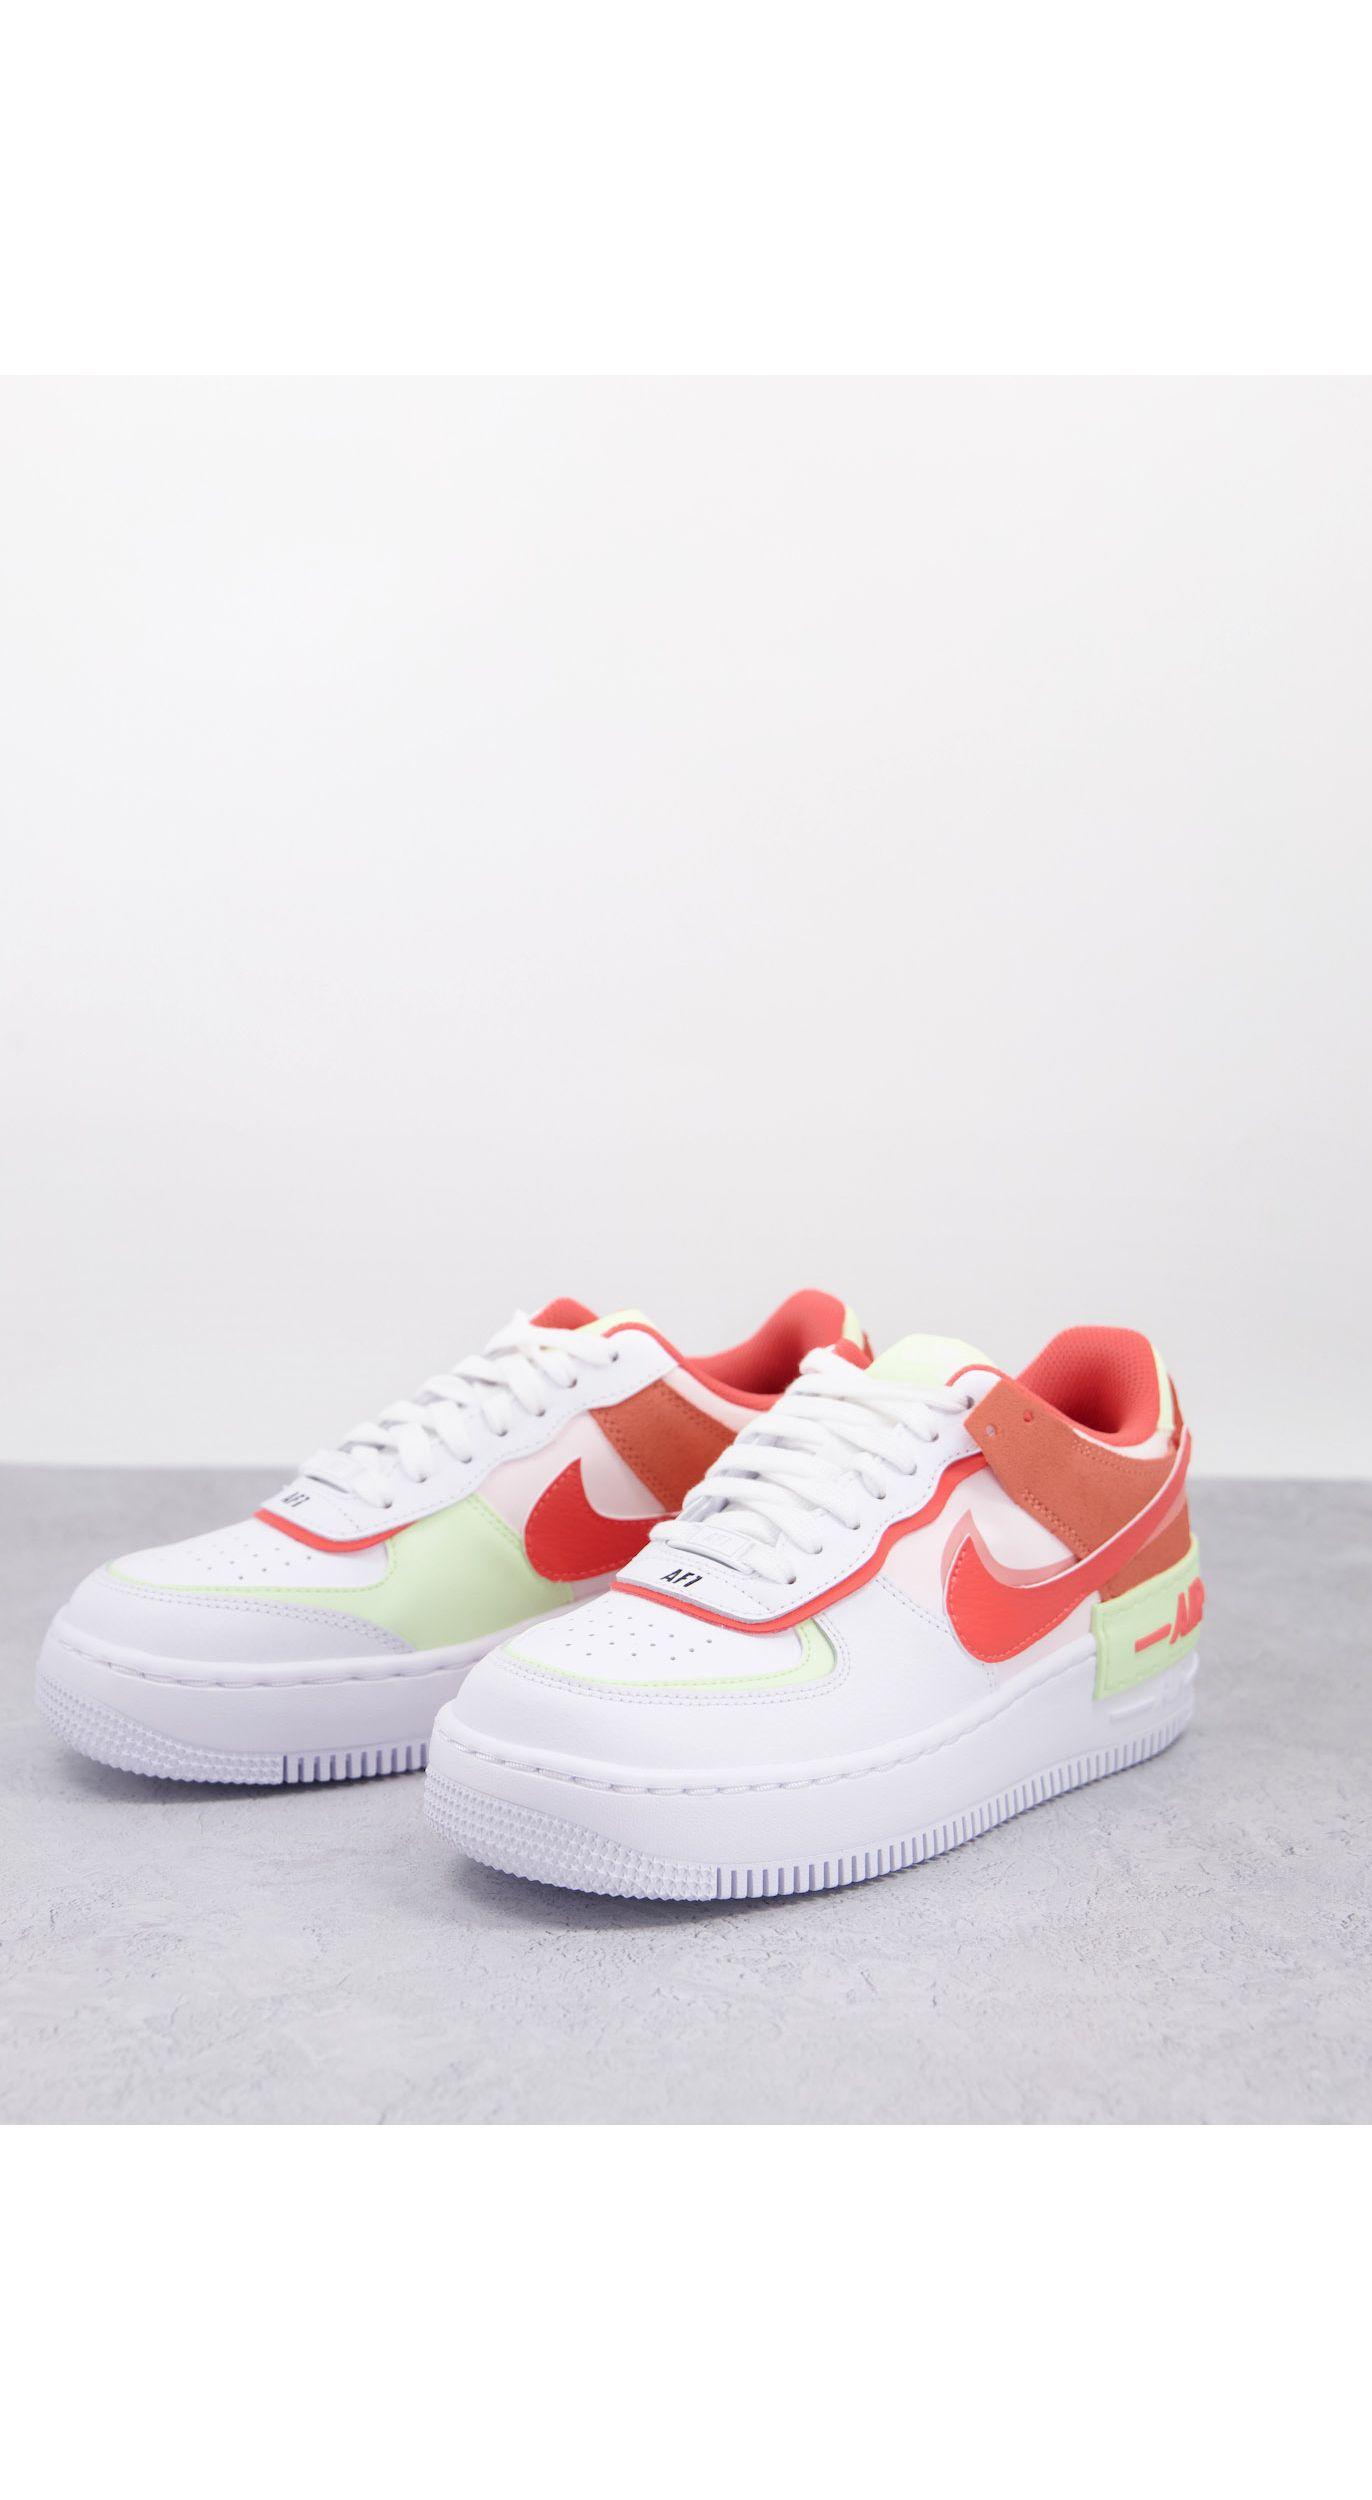 Nike Air Force 1 Shadow Trainers Coral And Orange in White | Lyst UK